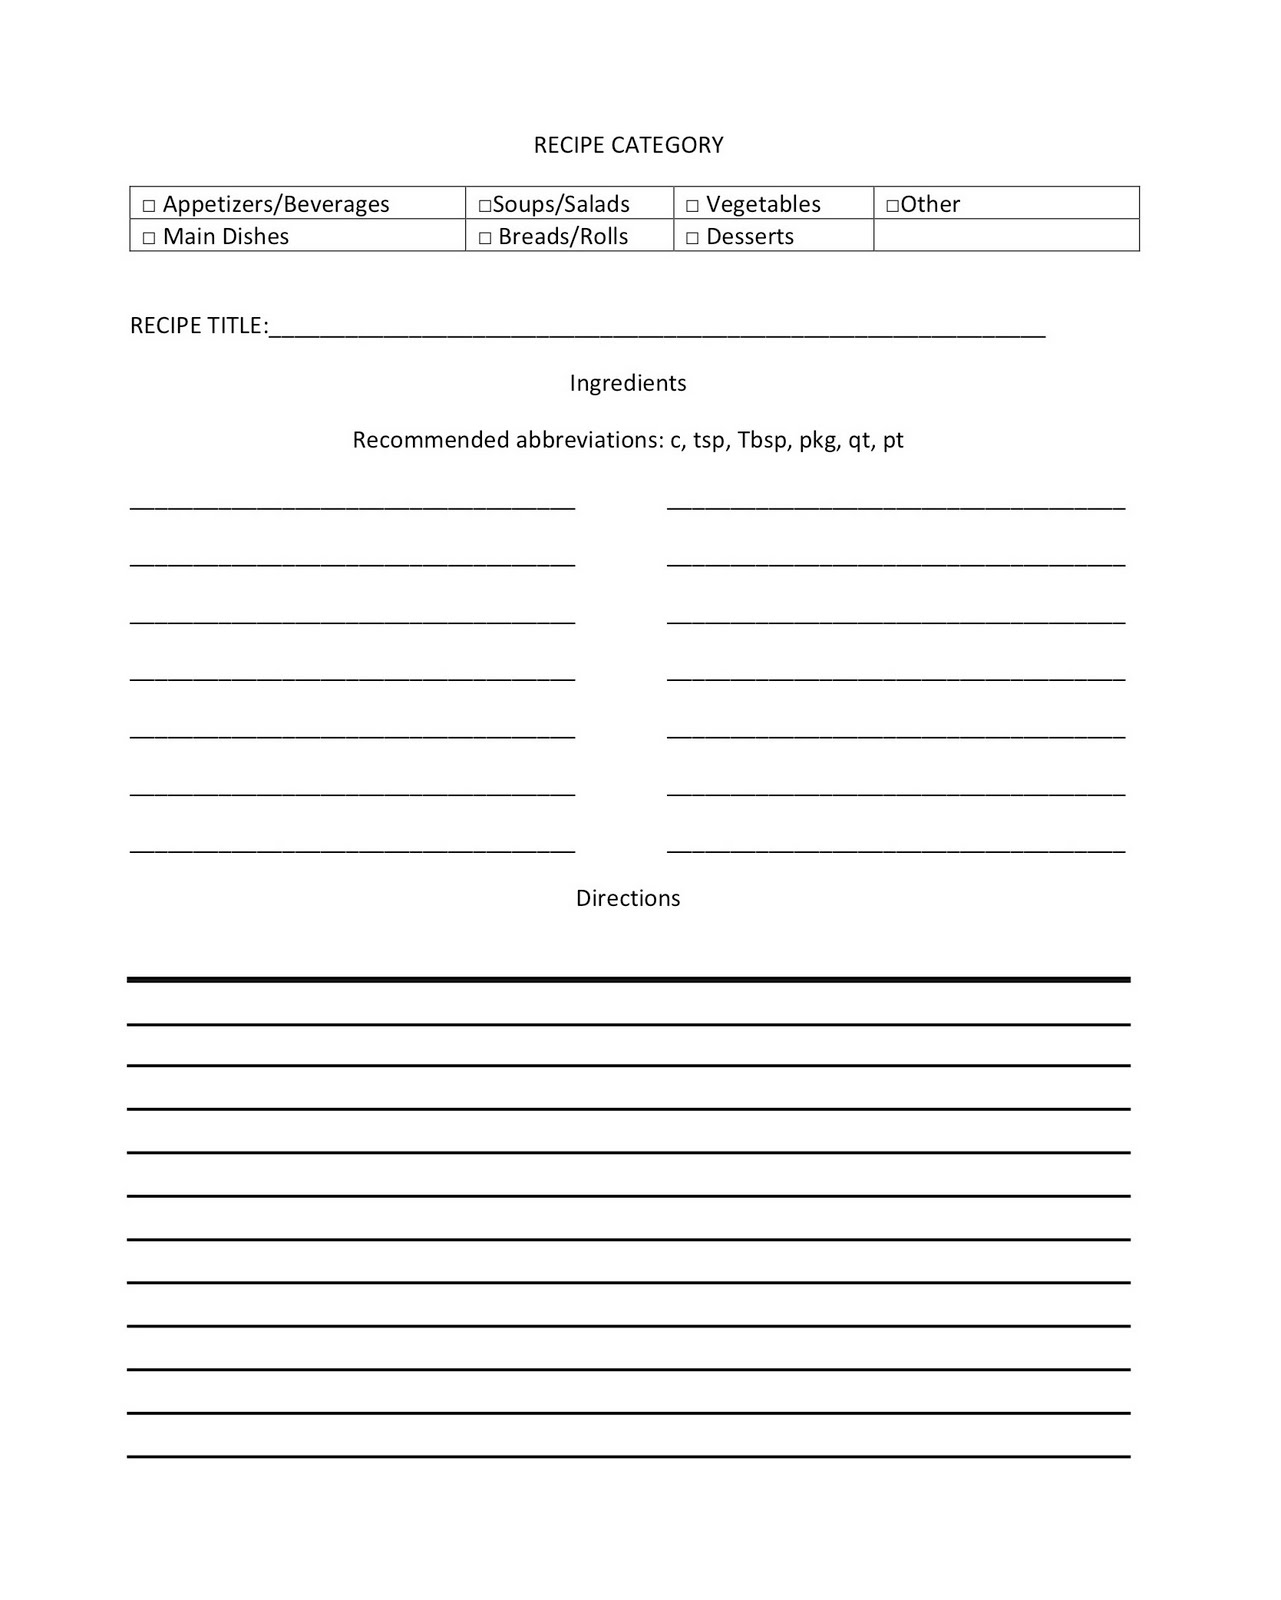 Recipe Forms Printable - Printable Forms Free Online